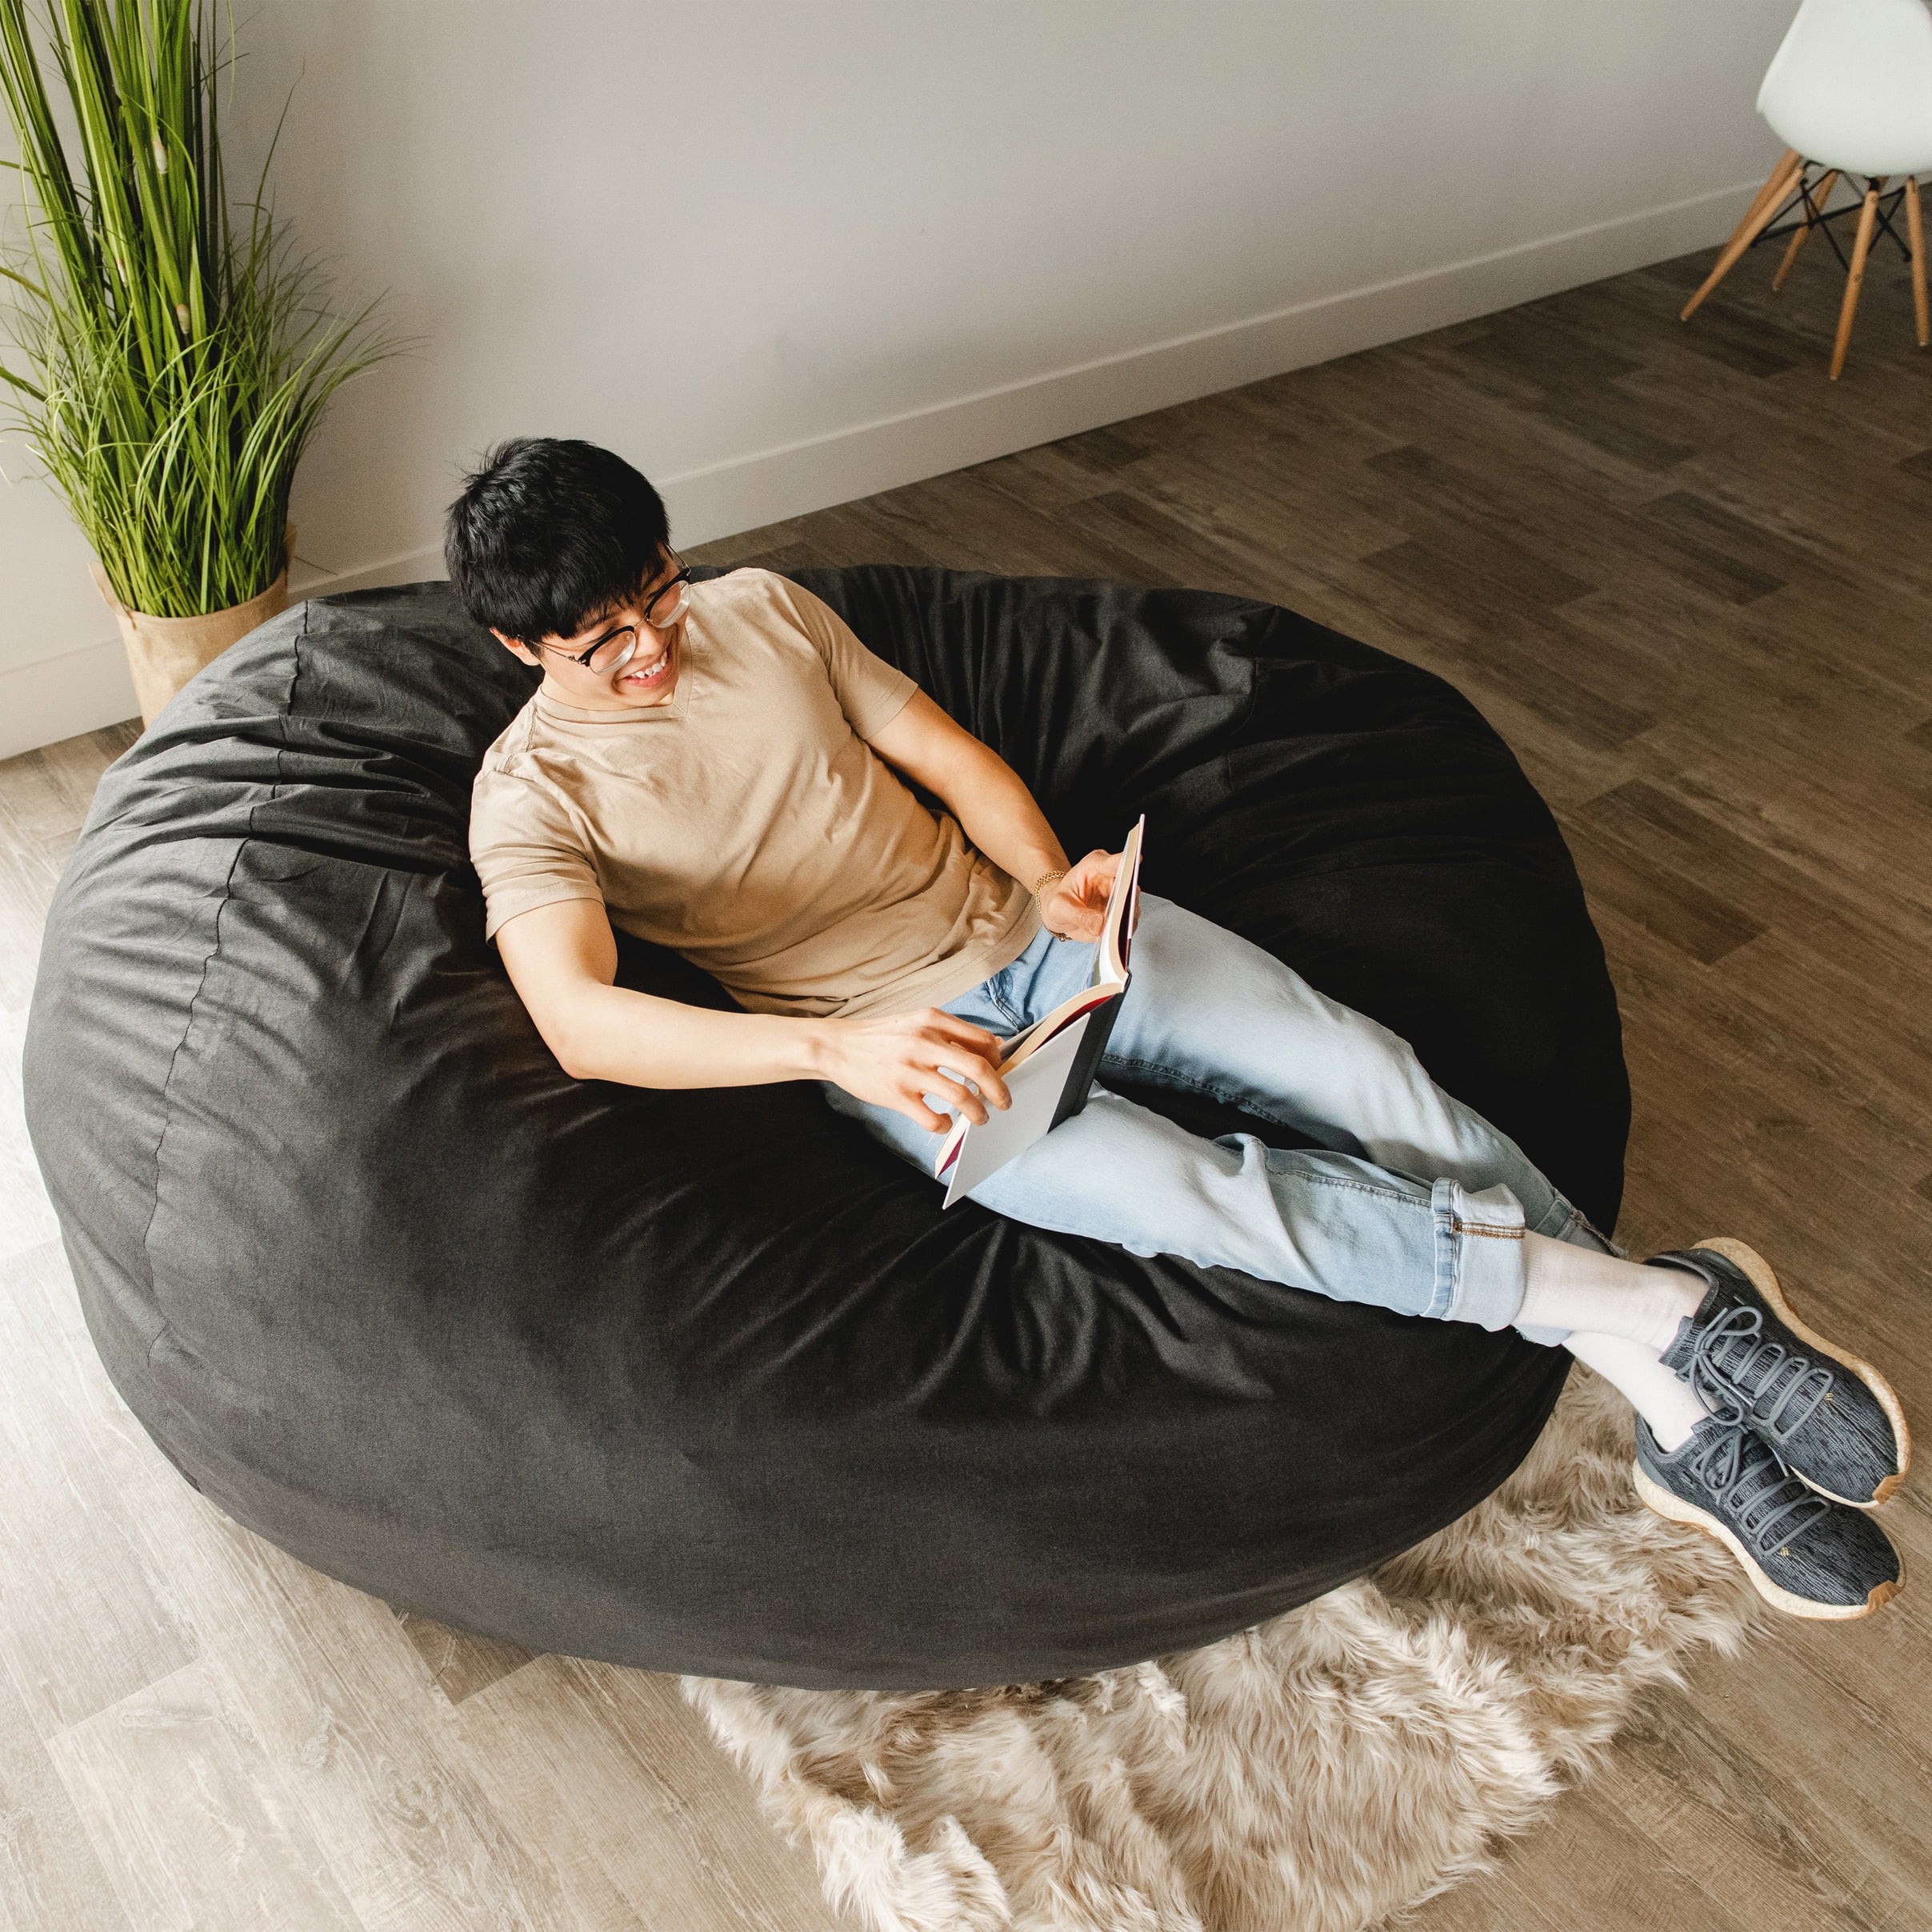 Amazon.com: Big Joe Fuf XXL Foam Filled Bean Bag Chair with Removable  Cover, Fog Lenox, Durable Woven Polyester, 6 feet Giant : Home & Kitchen